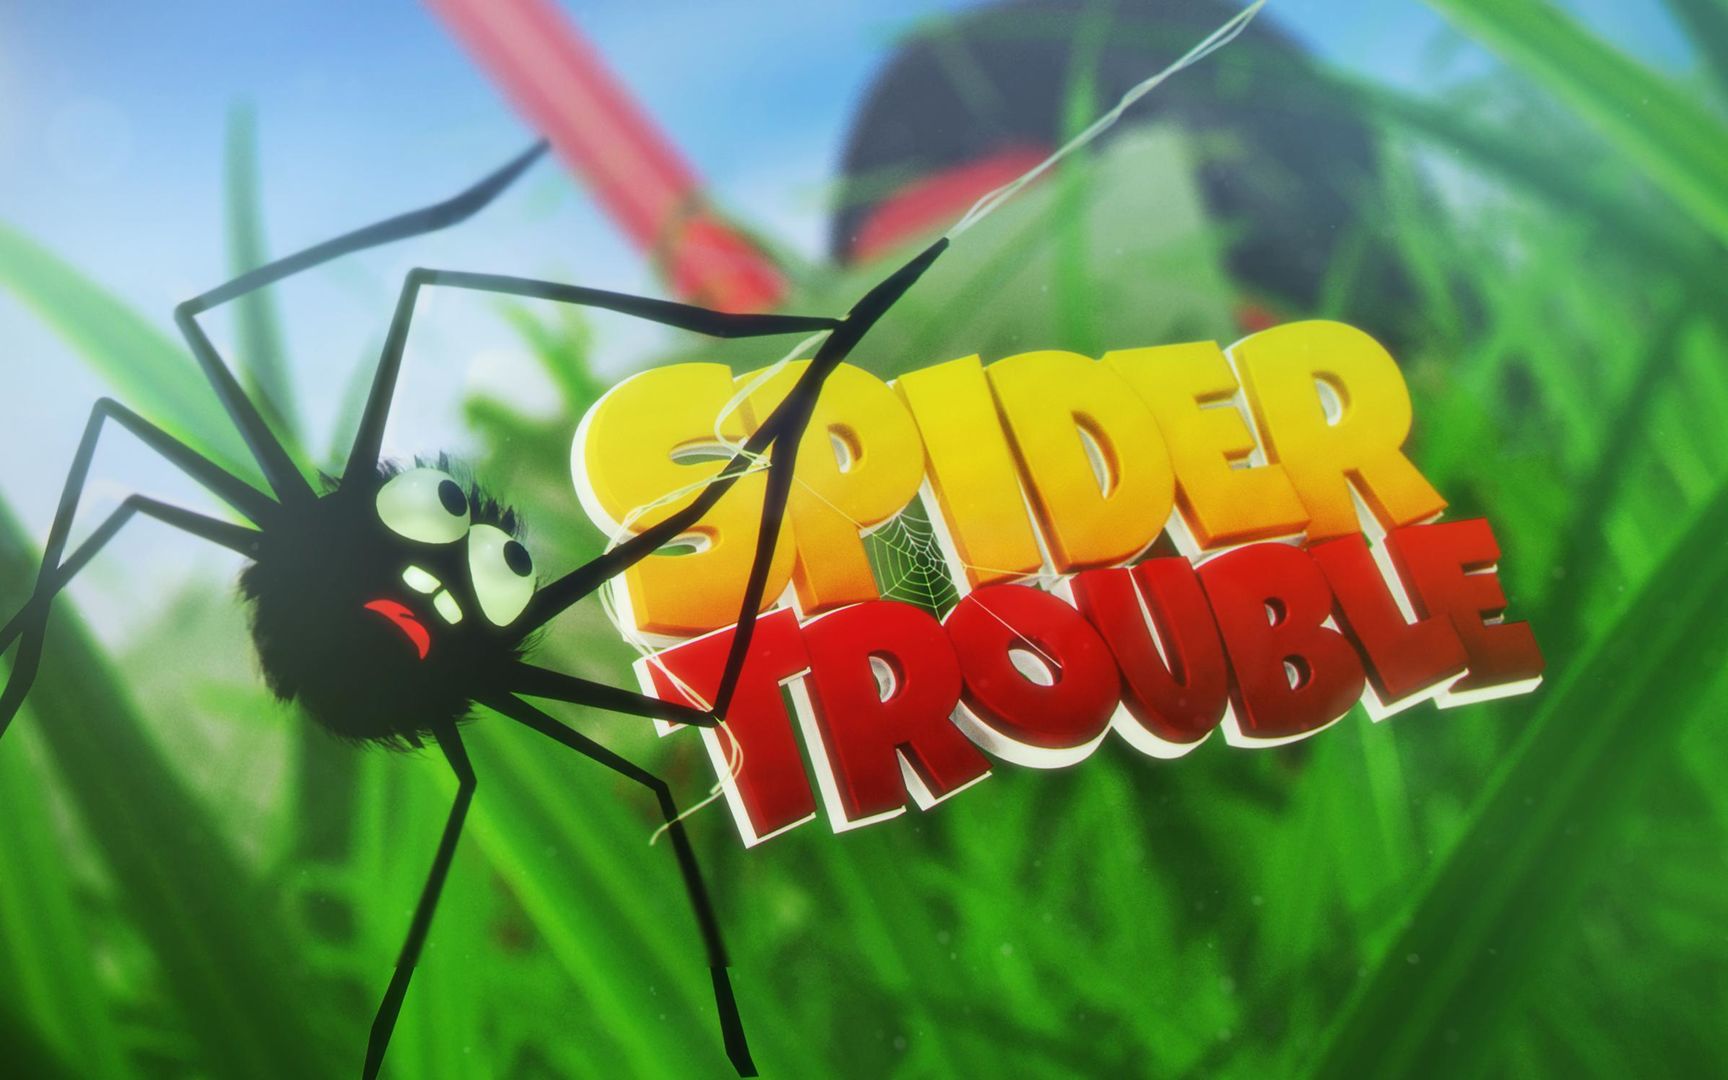 Screenshot of Spider Trouble